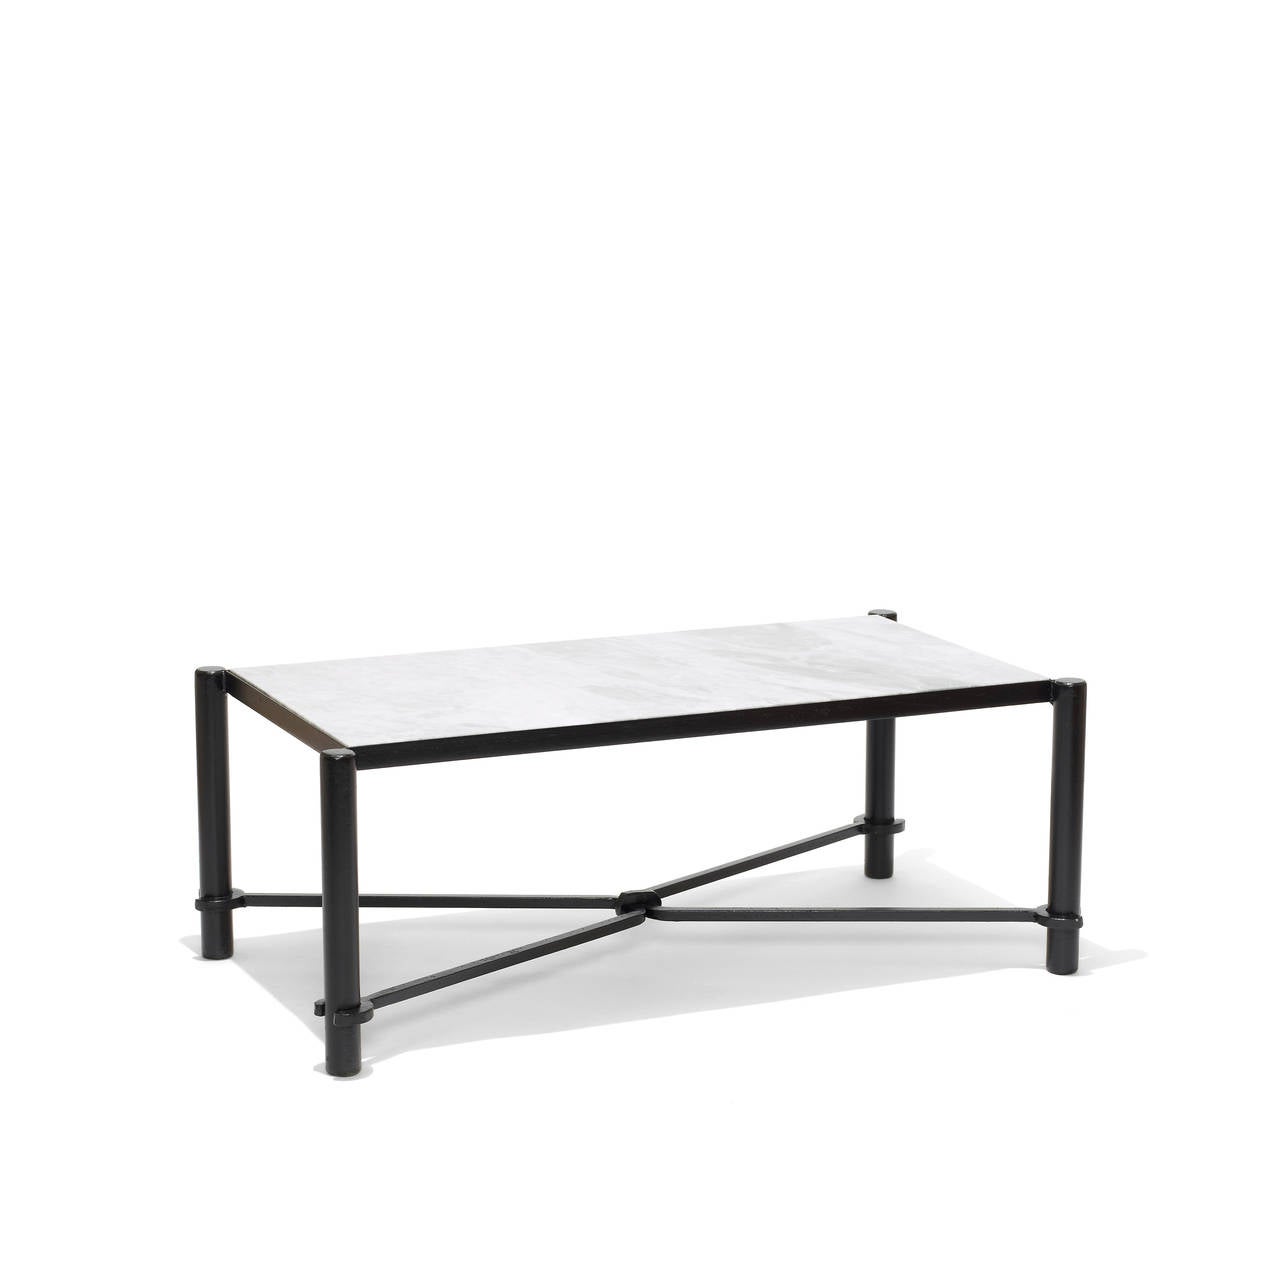 Coffee table with articulated legs and decorative stretcher with horse-tack-like feel by Jacques Adnet (1901-1984), in black-painted iron with marble top, France, mid-20th century.

16.5 in. (42 cm) H x 43 in. (109 cm) L x 23 in. (58 cm) W; table